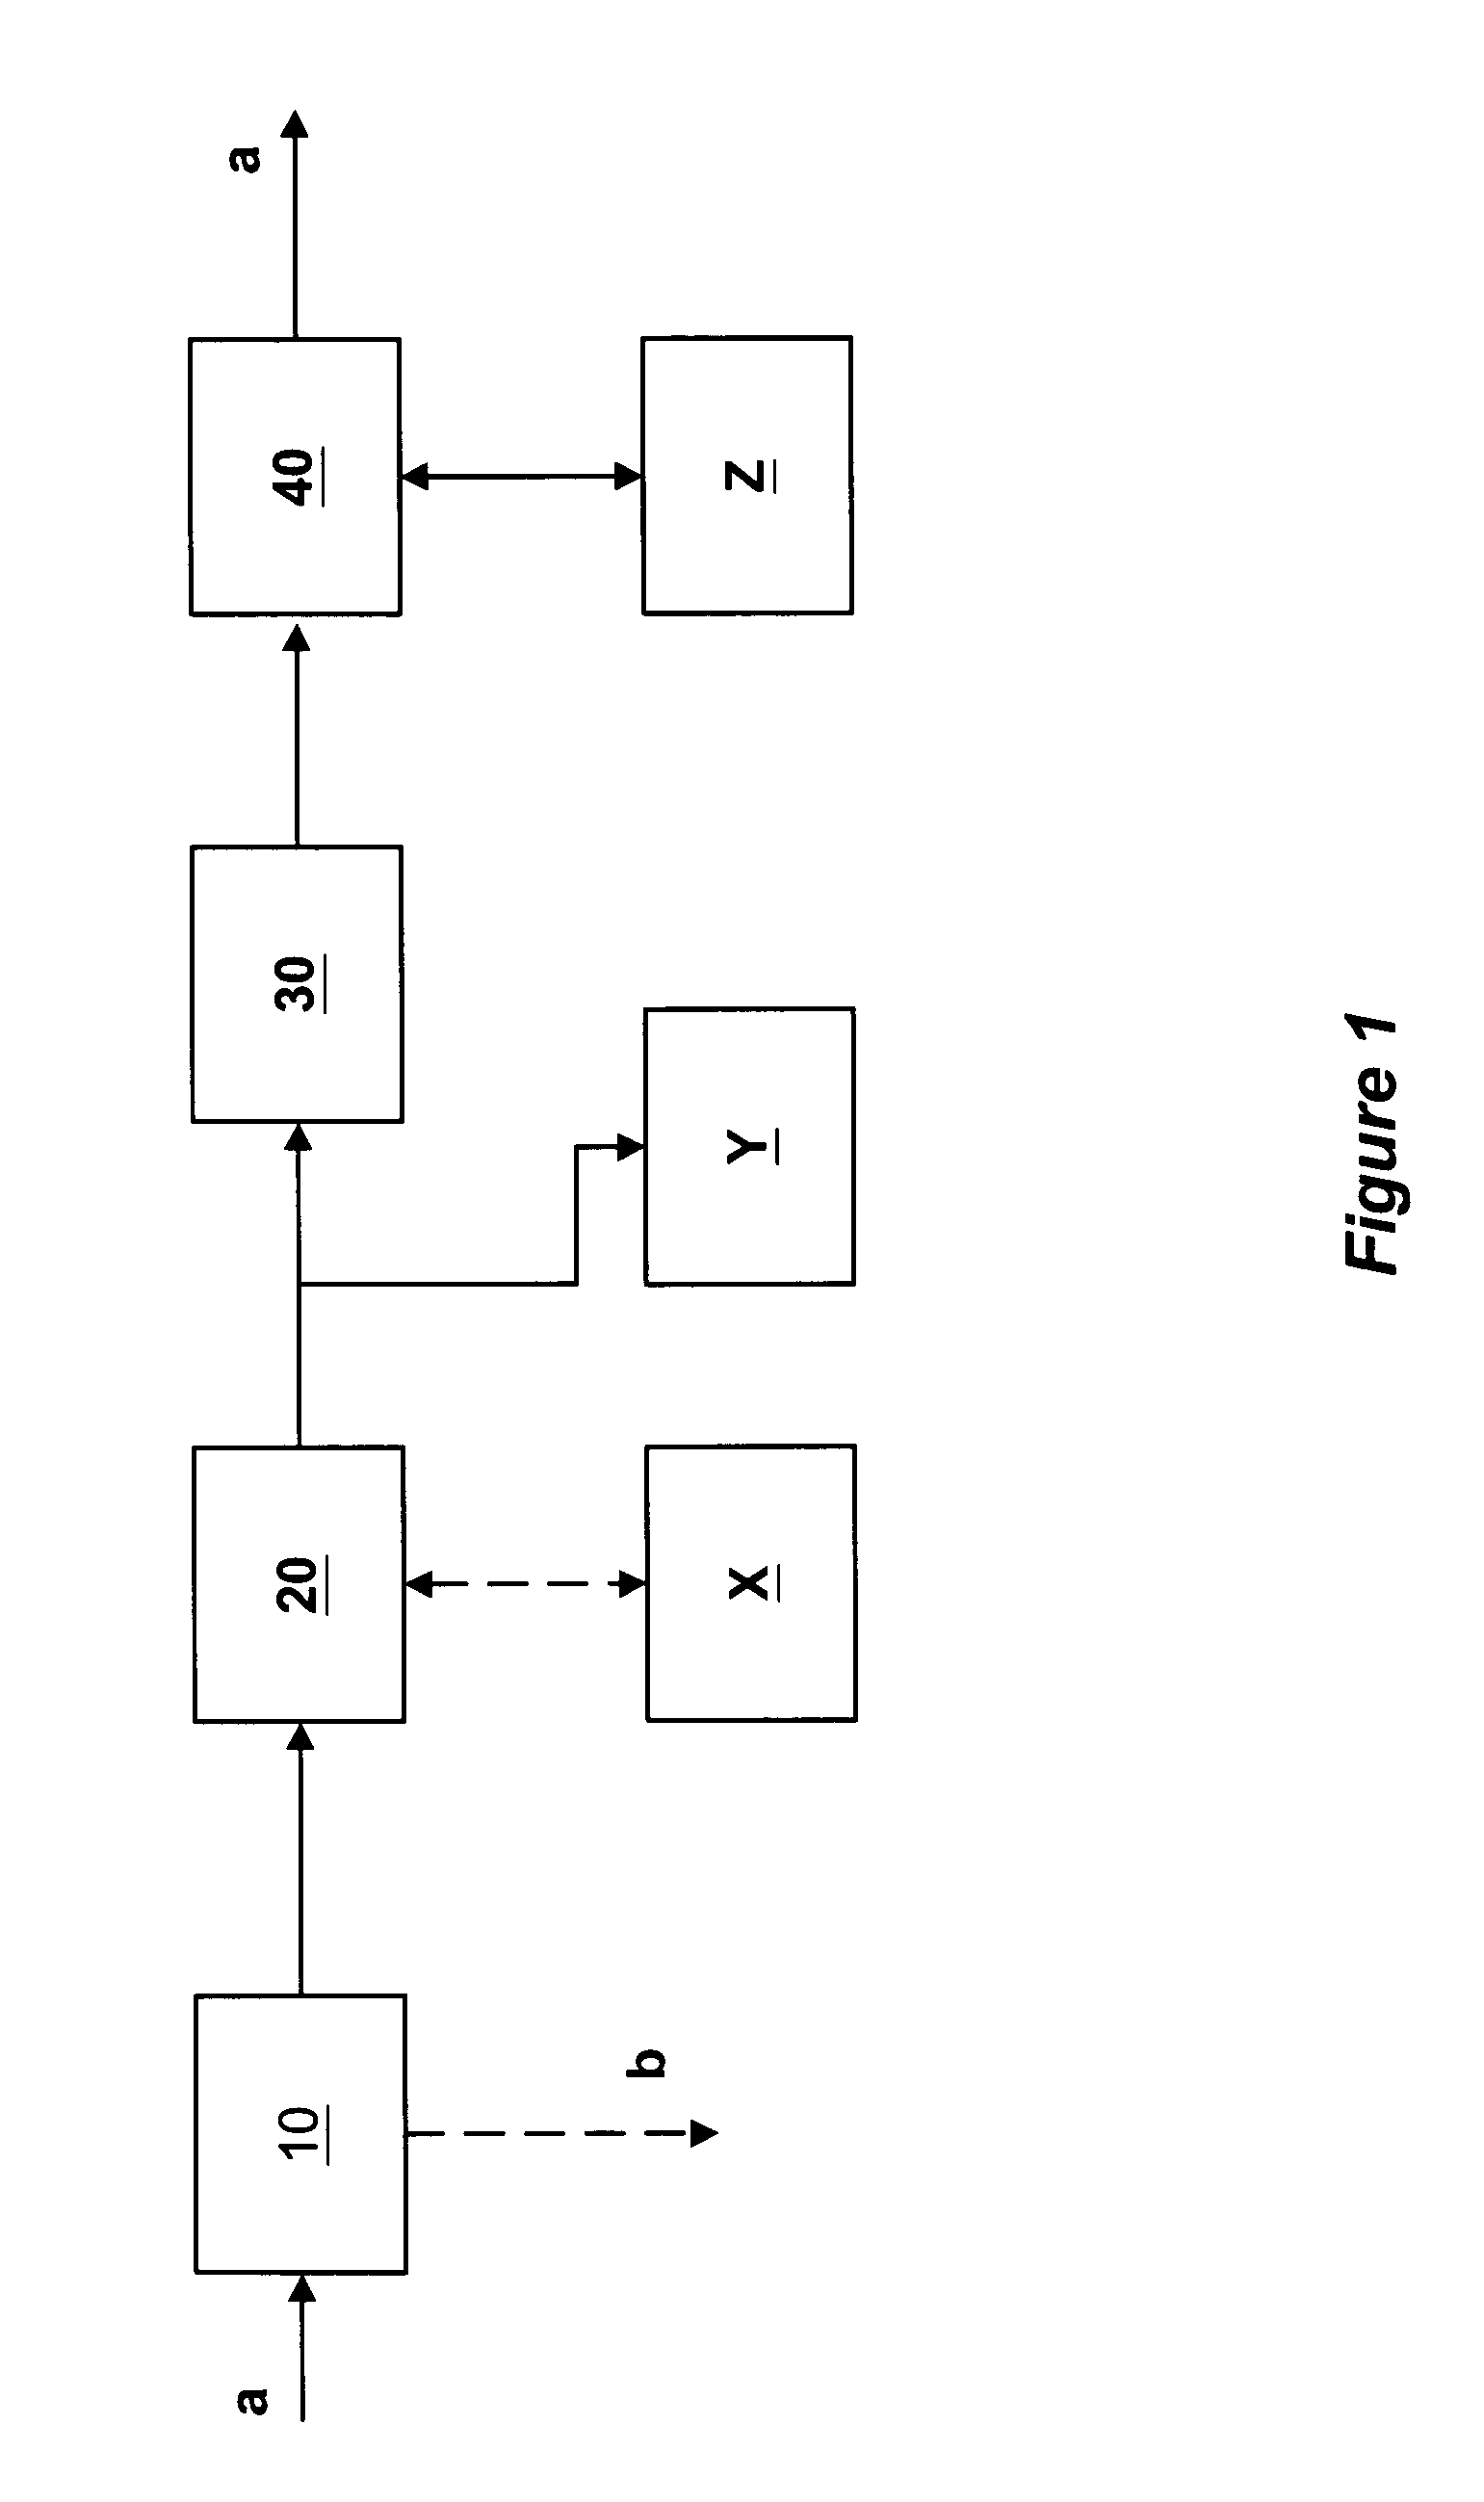 Apparatus, methods and articles of manufacture for intercepting, examining and controlling code, data and files and their transfer